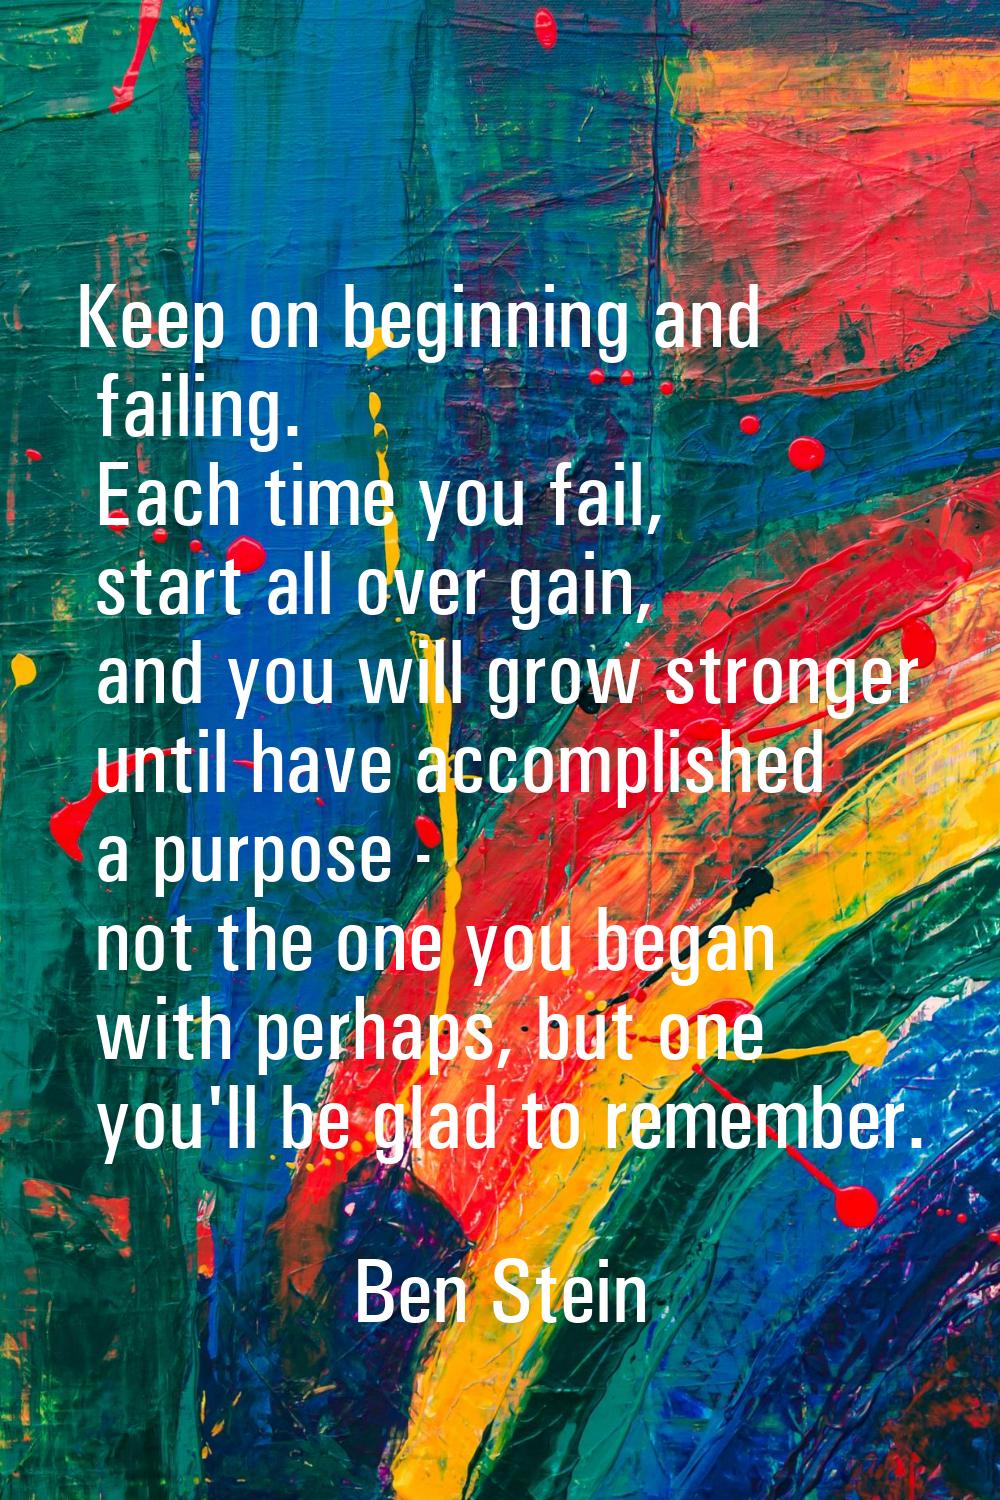 Keep on beginning and failing. Each time you fail, start all over gain, and you will grow stronger 